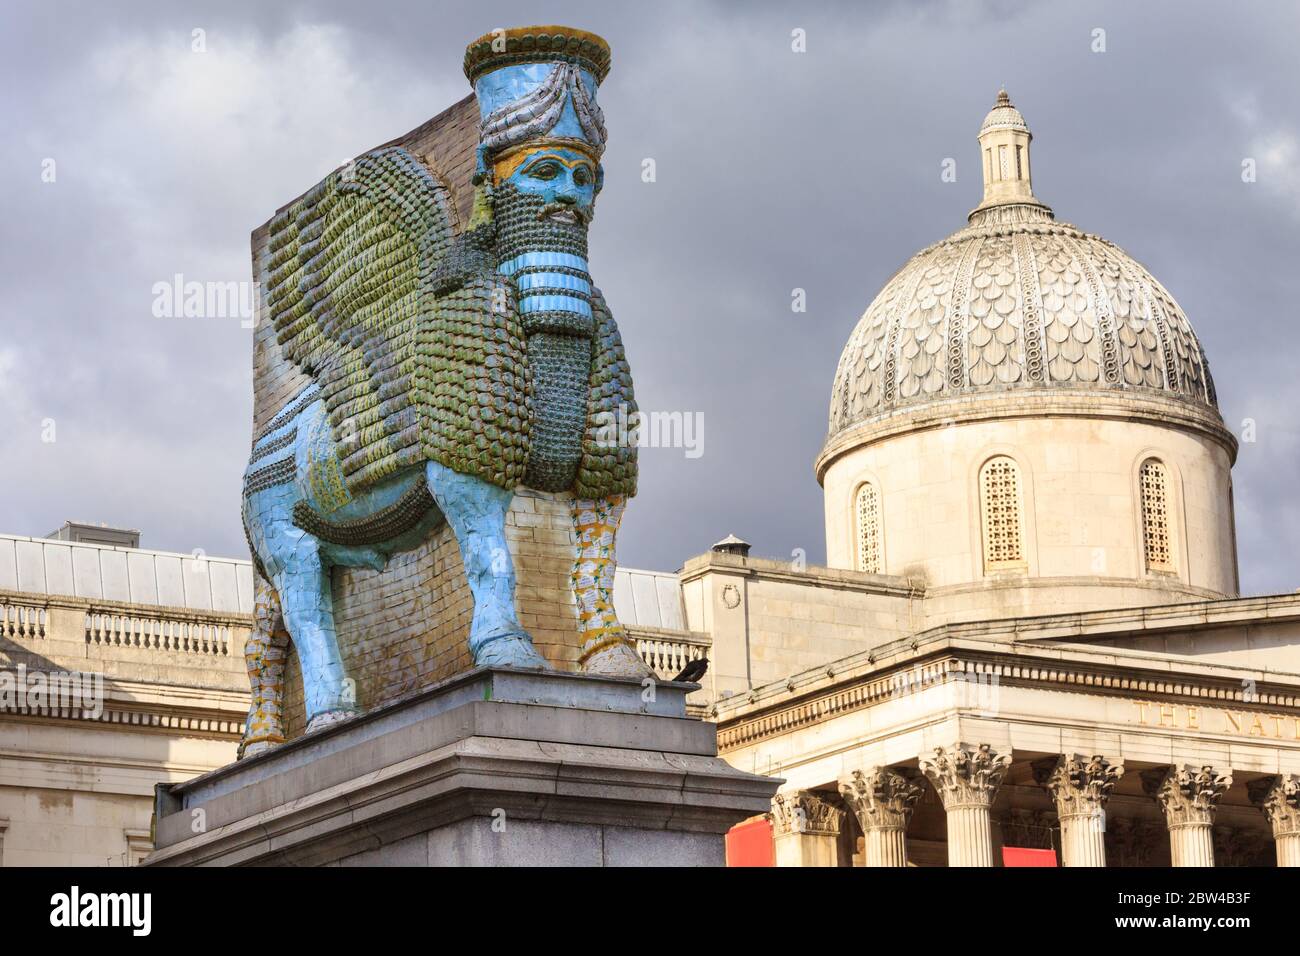 'The Invisible Enemy Should Not Exist' statue and re-creation of mythical beast by Michael Rabowitz on Trafalgar Square's Fourth Plinth, London, UK Stock Photo